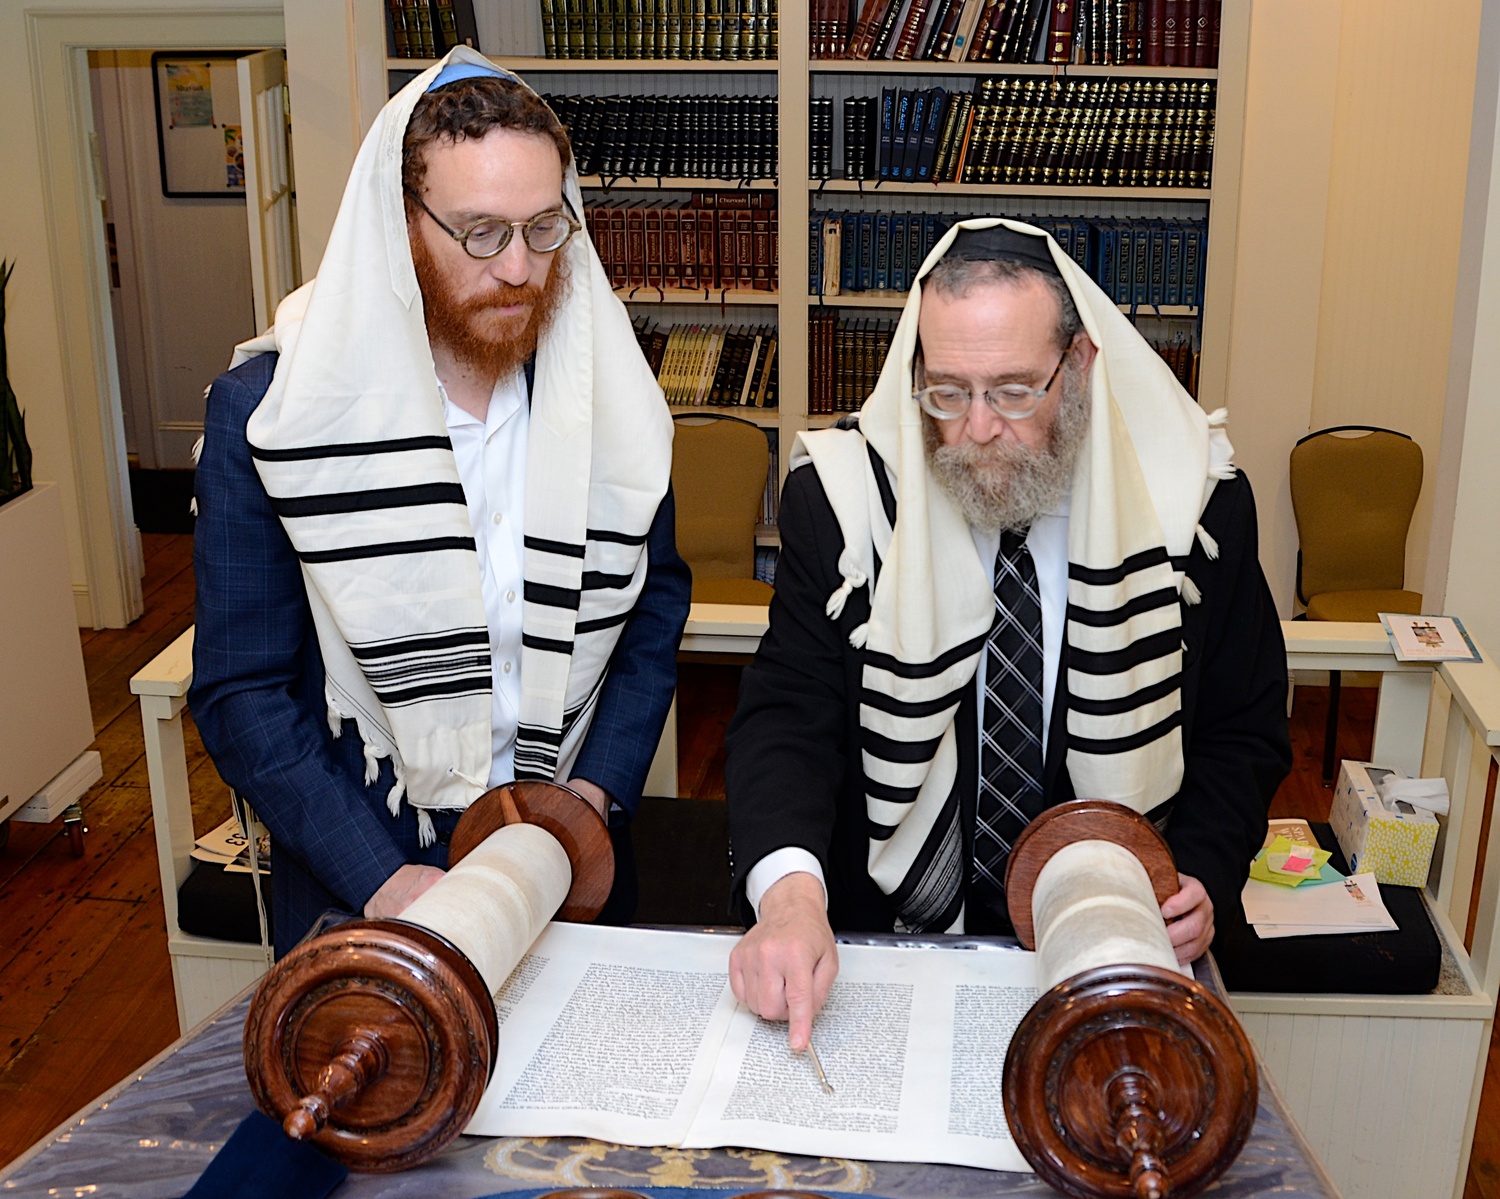 Chabad of the Hamptons Rabbi Leibel Baumgarten reads from the Torah as his son, Assistant Rabbi Aizik Baumgarten, looks on. KYRIL BROMLEY